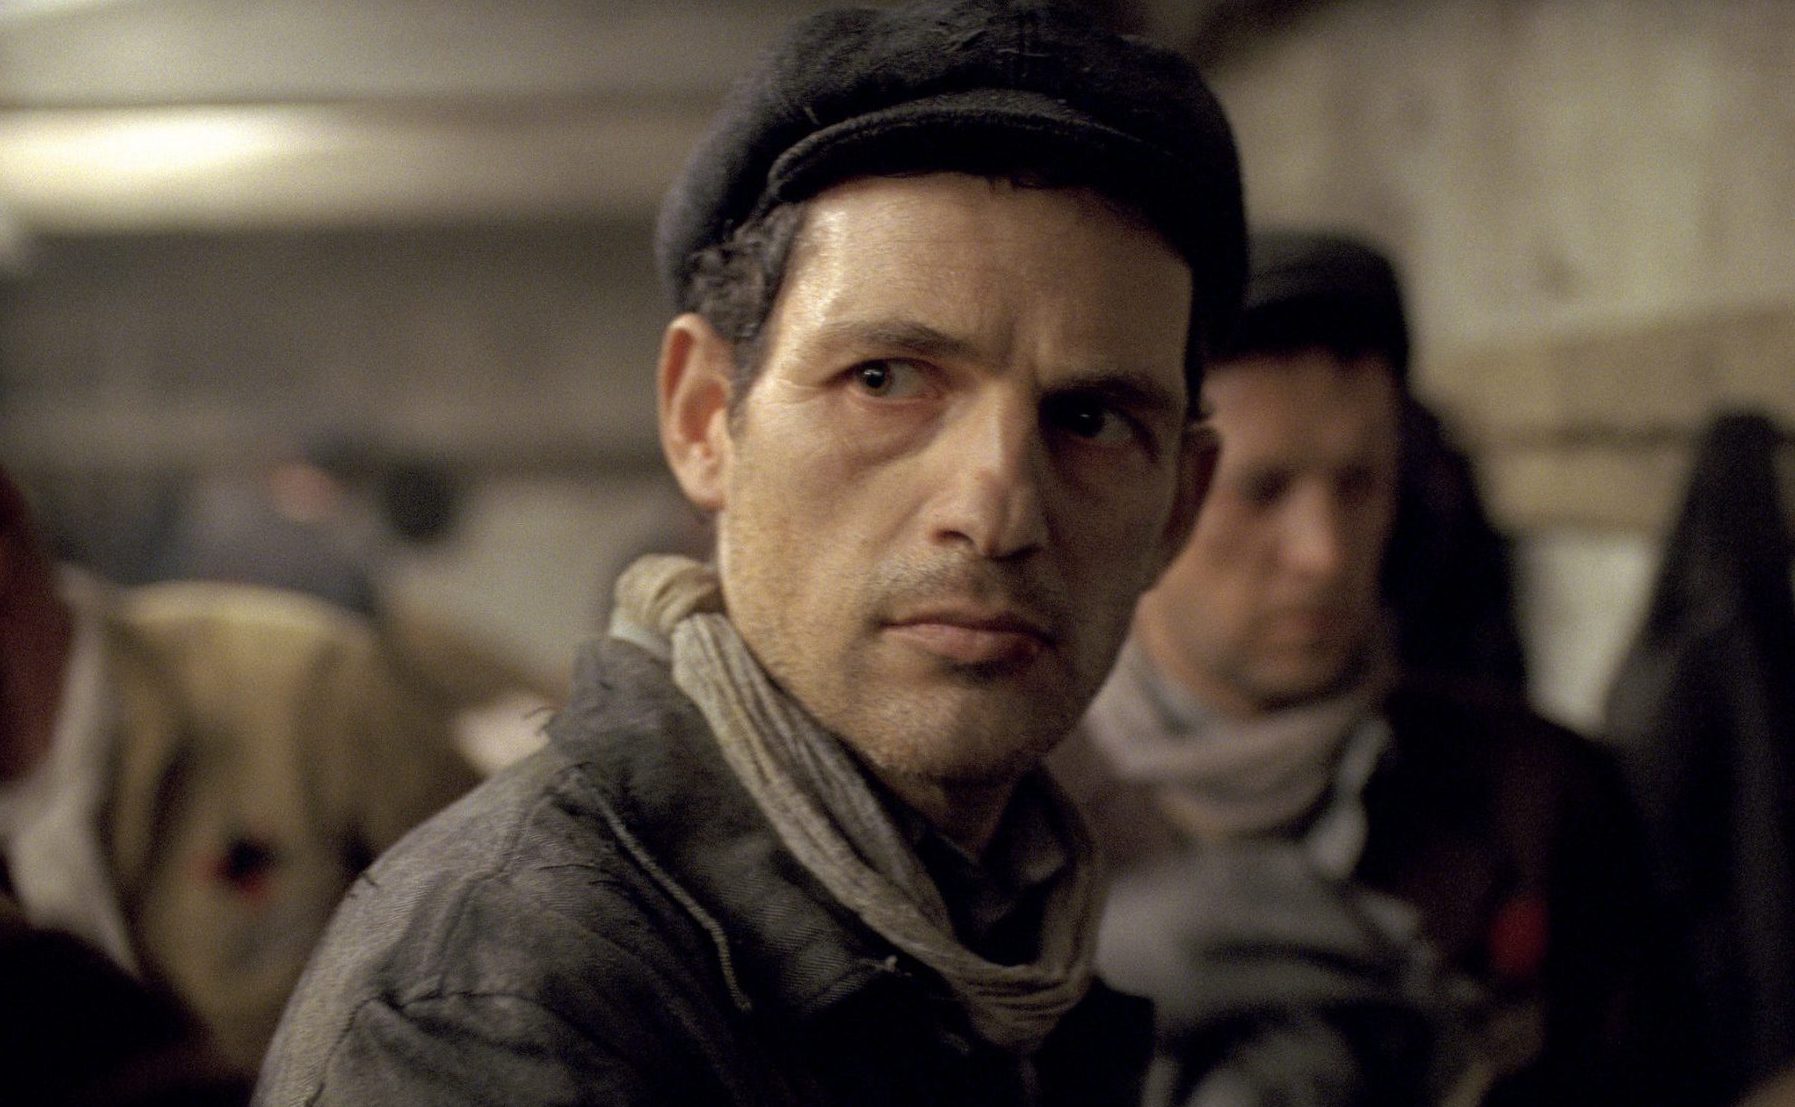 Photograph from the 2015 film "Son of Saul," showing a grim-looking man frowning, wearing a gray hat, scarf, and heavy coat